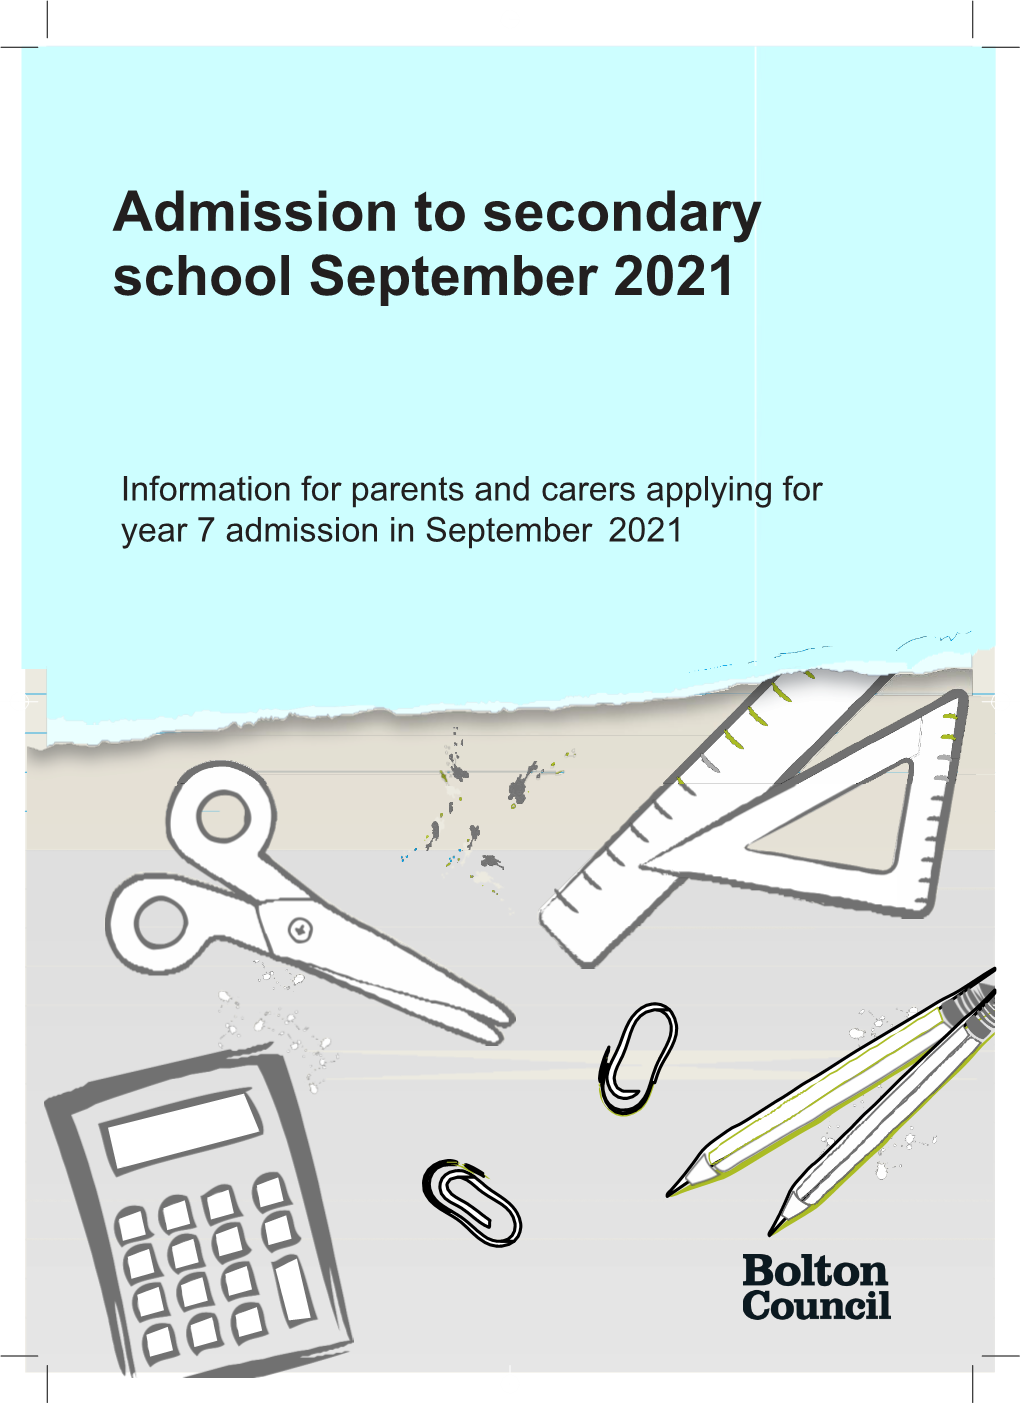 Admission to Secondary School September 2021